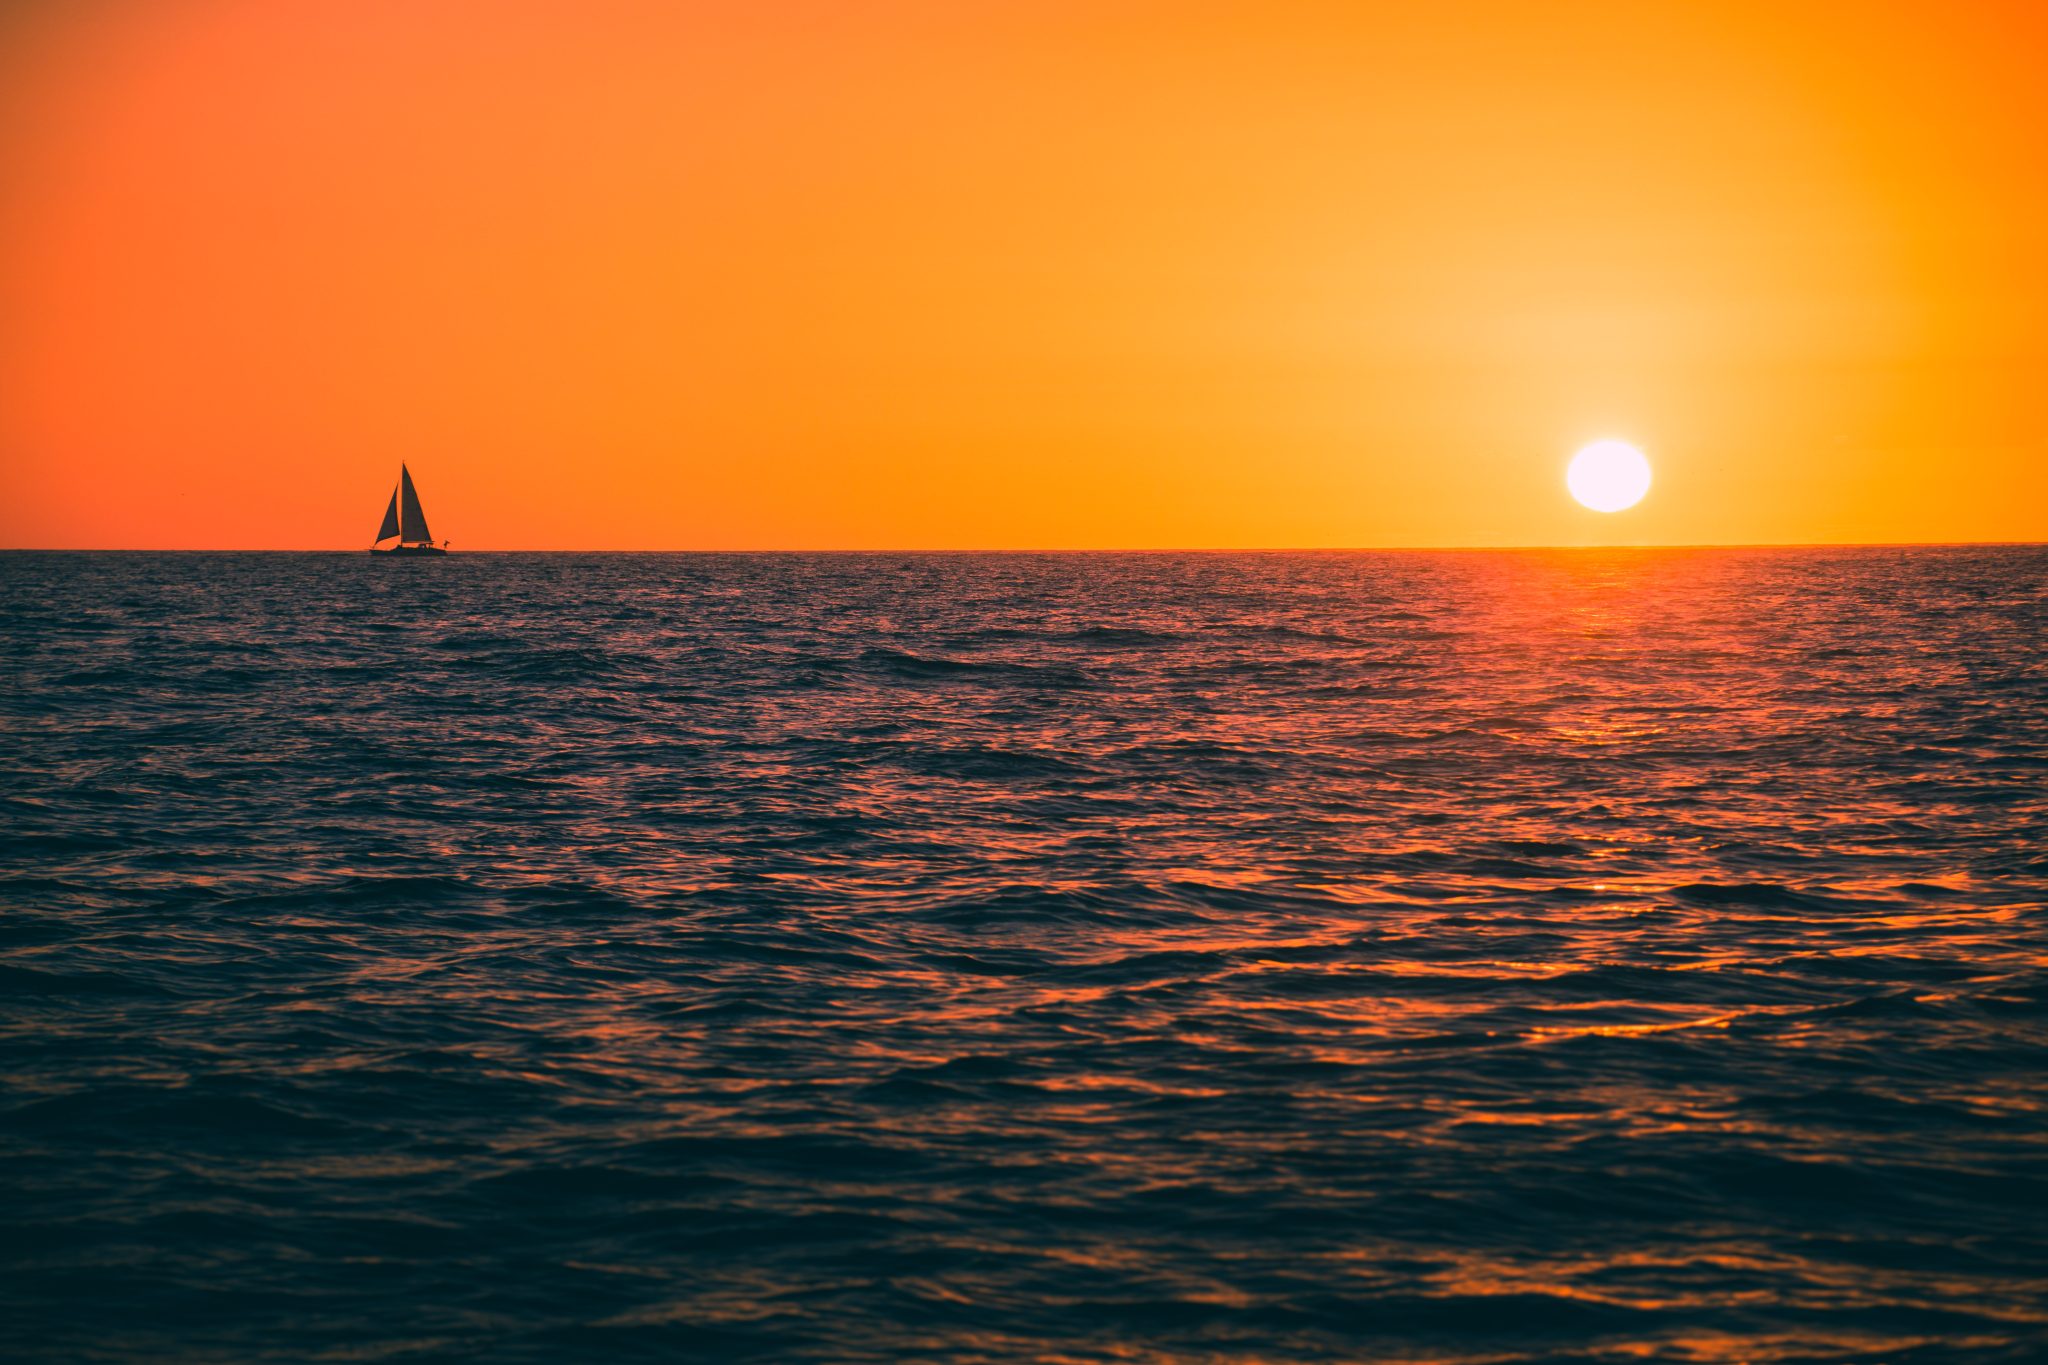 Single sailboat on the water at sunset